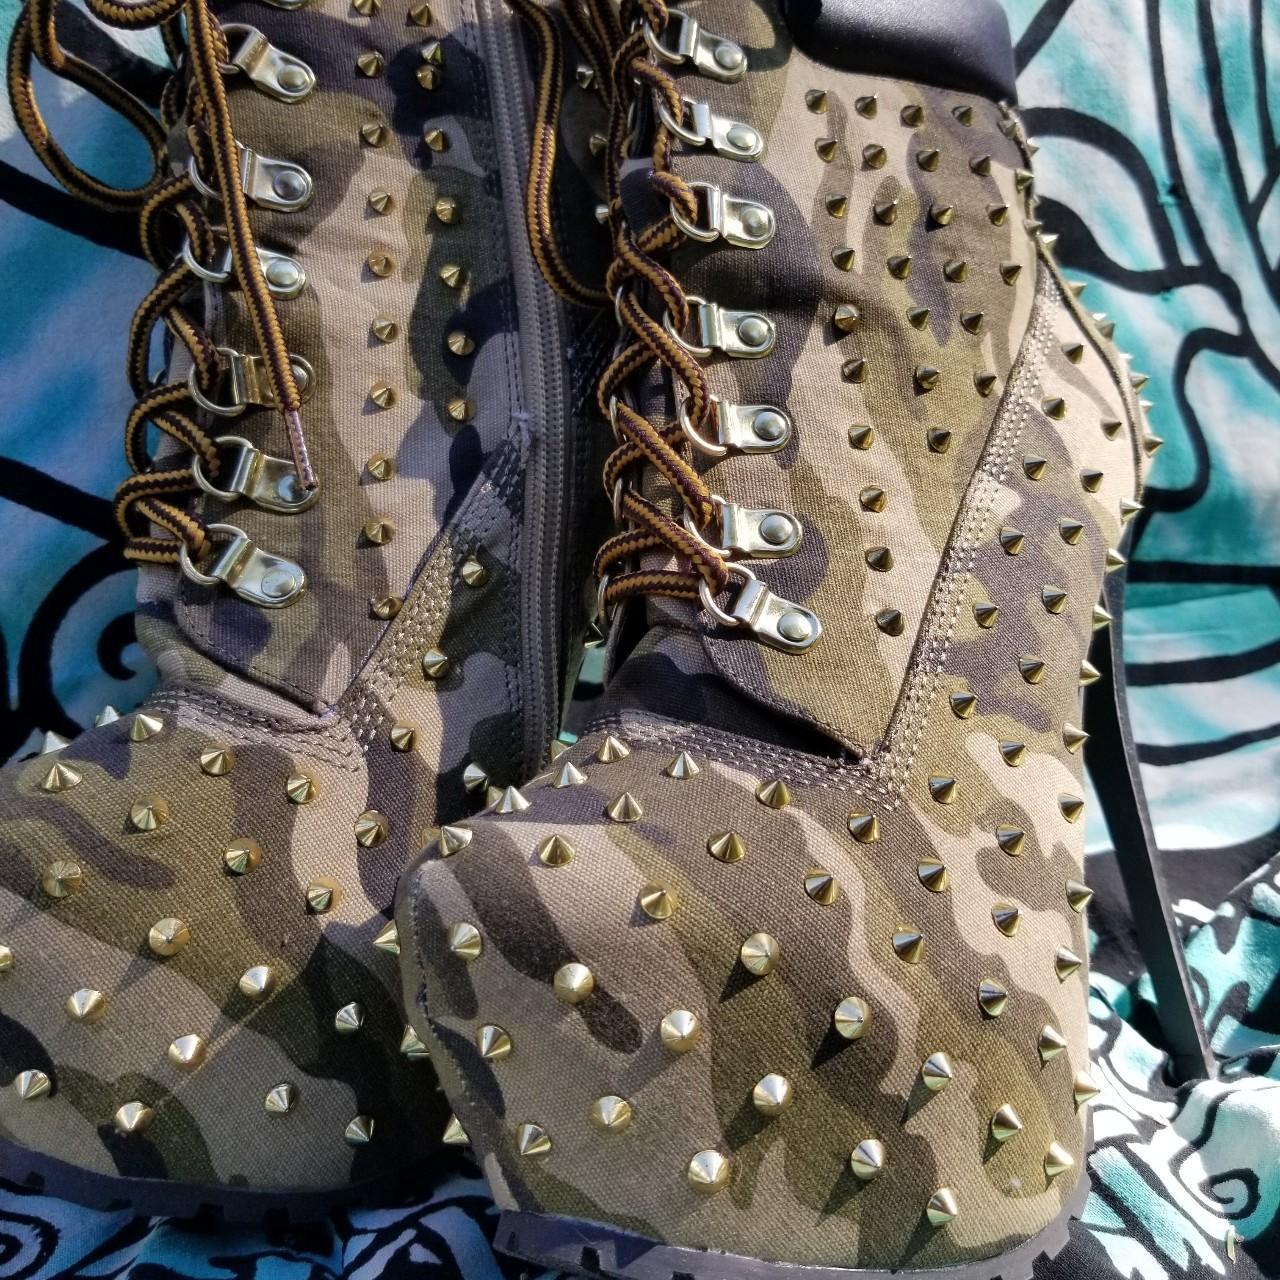 Product Image 2 - Camouflage gold spiked heels. These